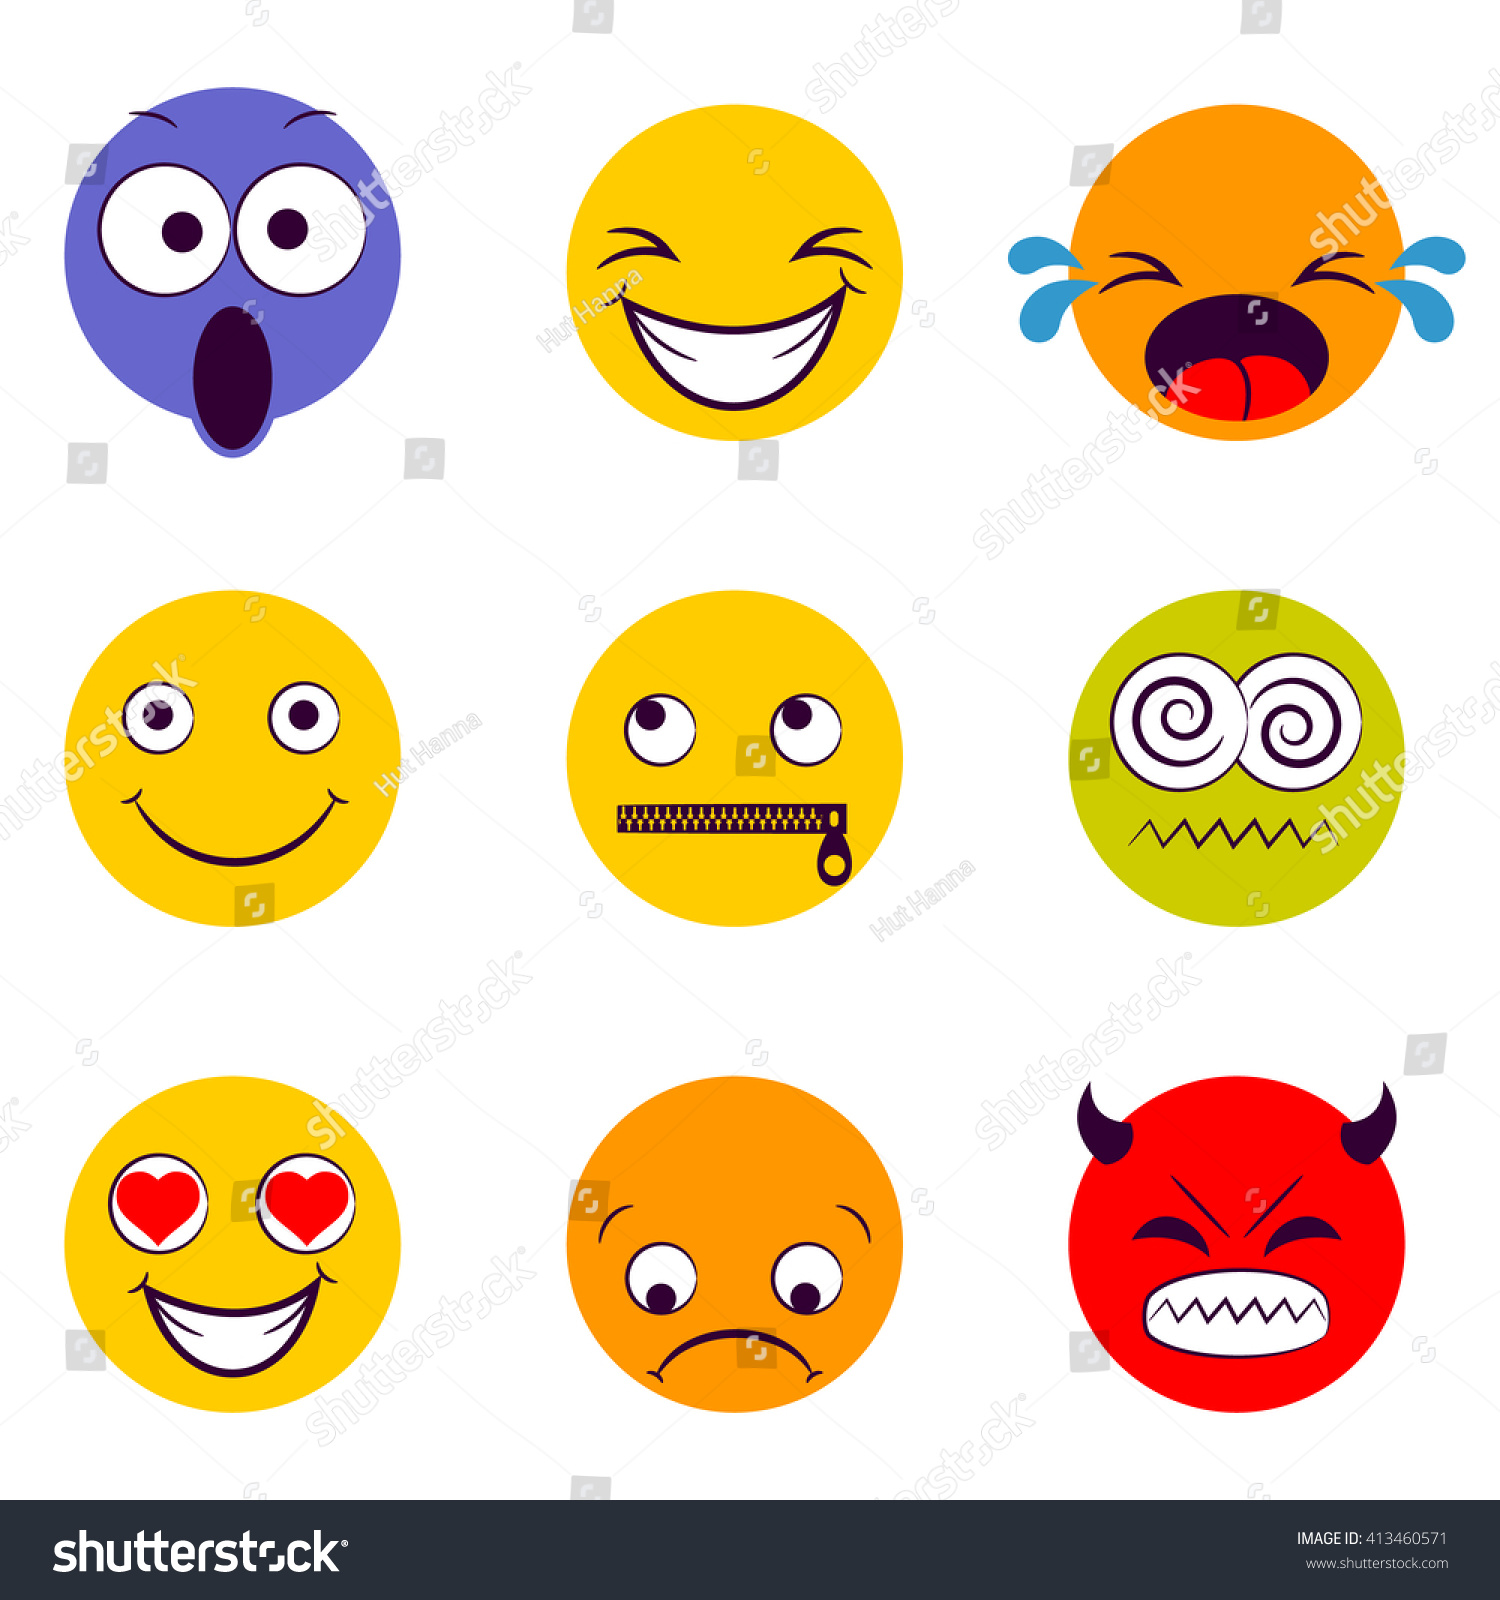 Smile Icon Smiley Faces Expressing Different Stock Vector Royalty Free